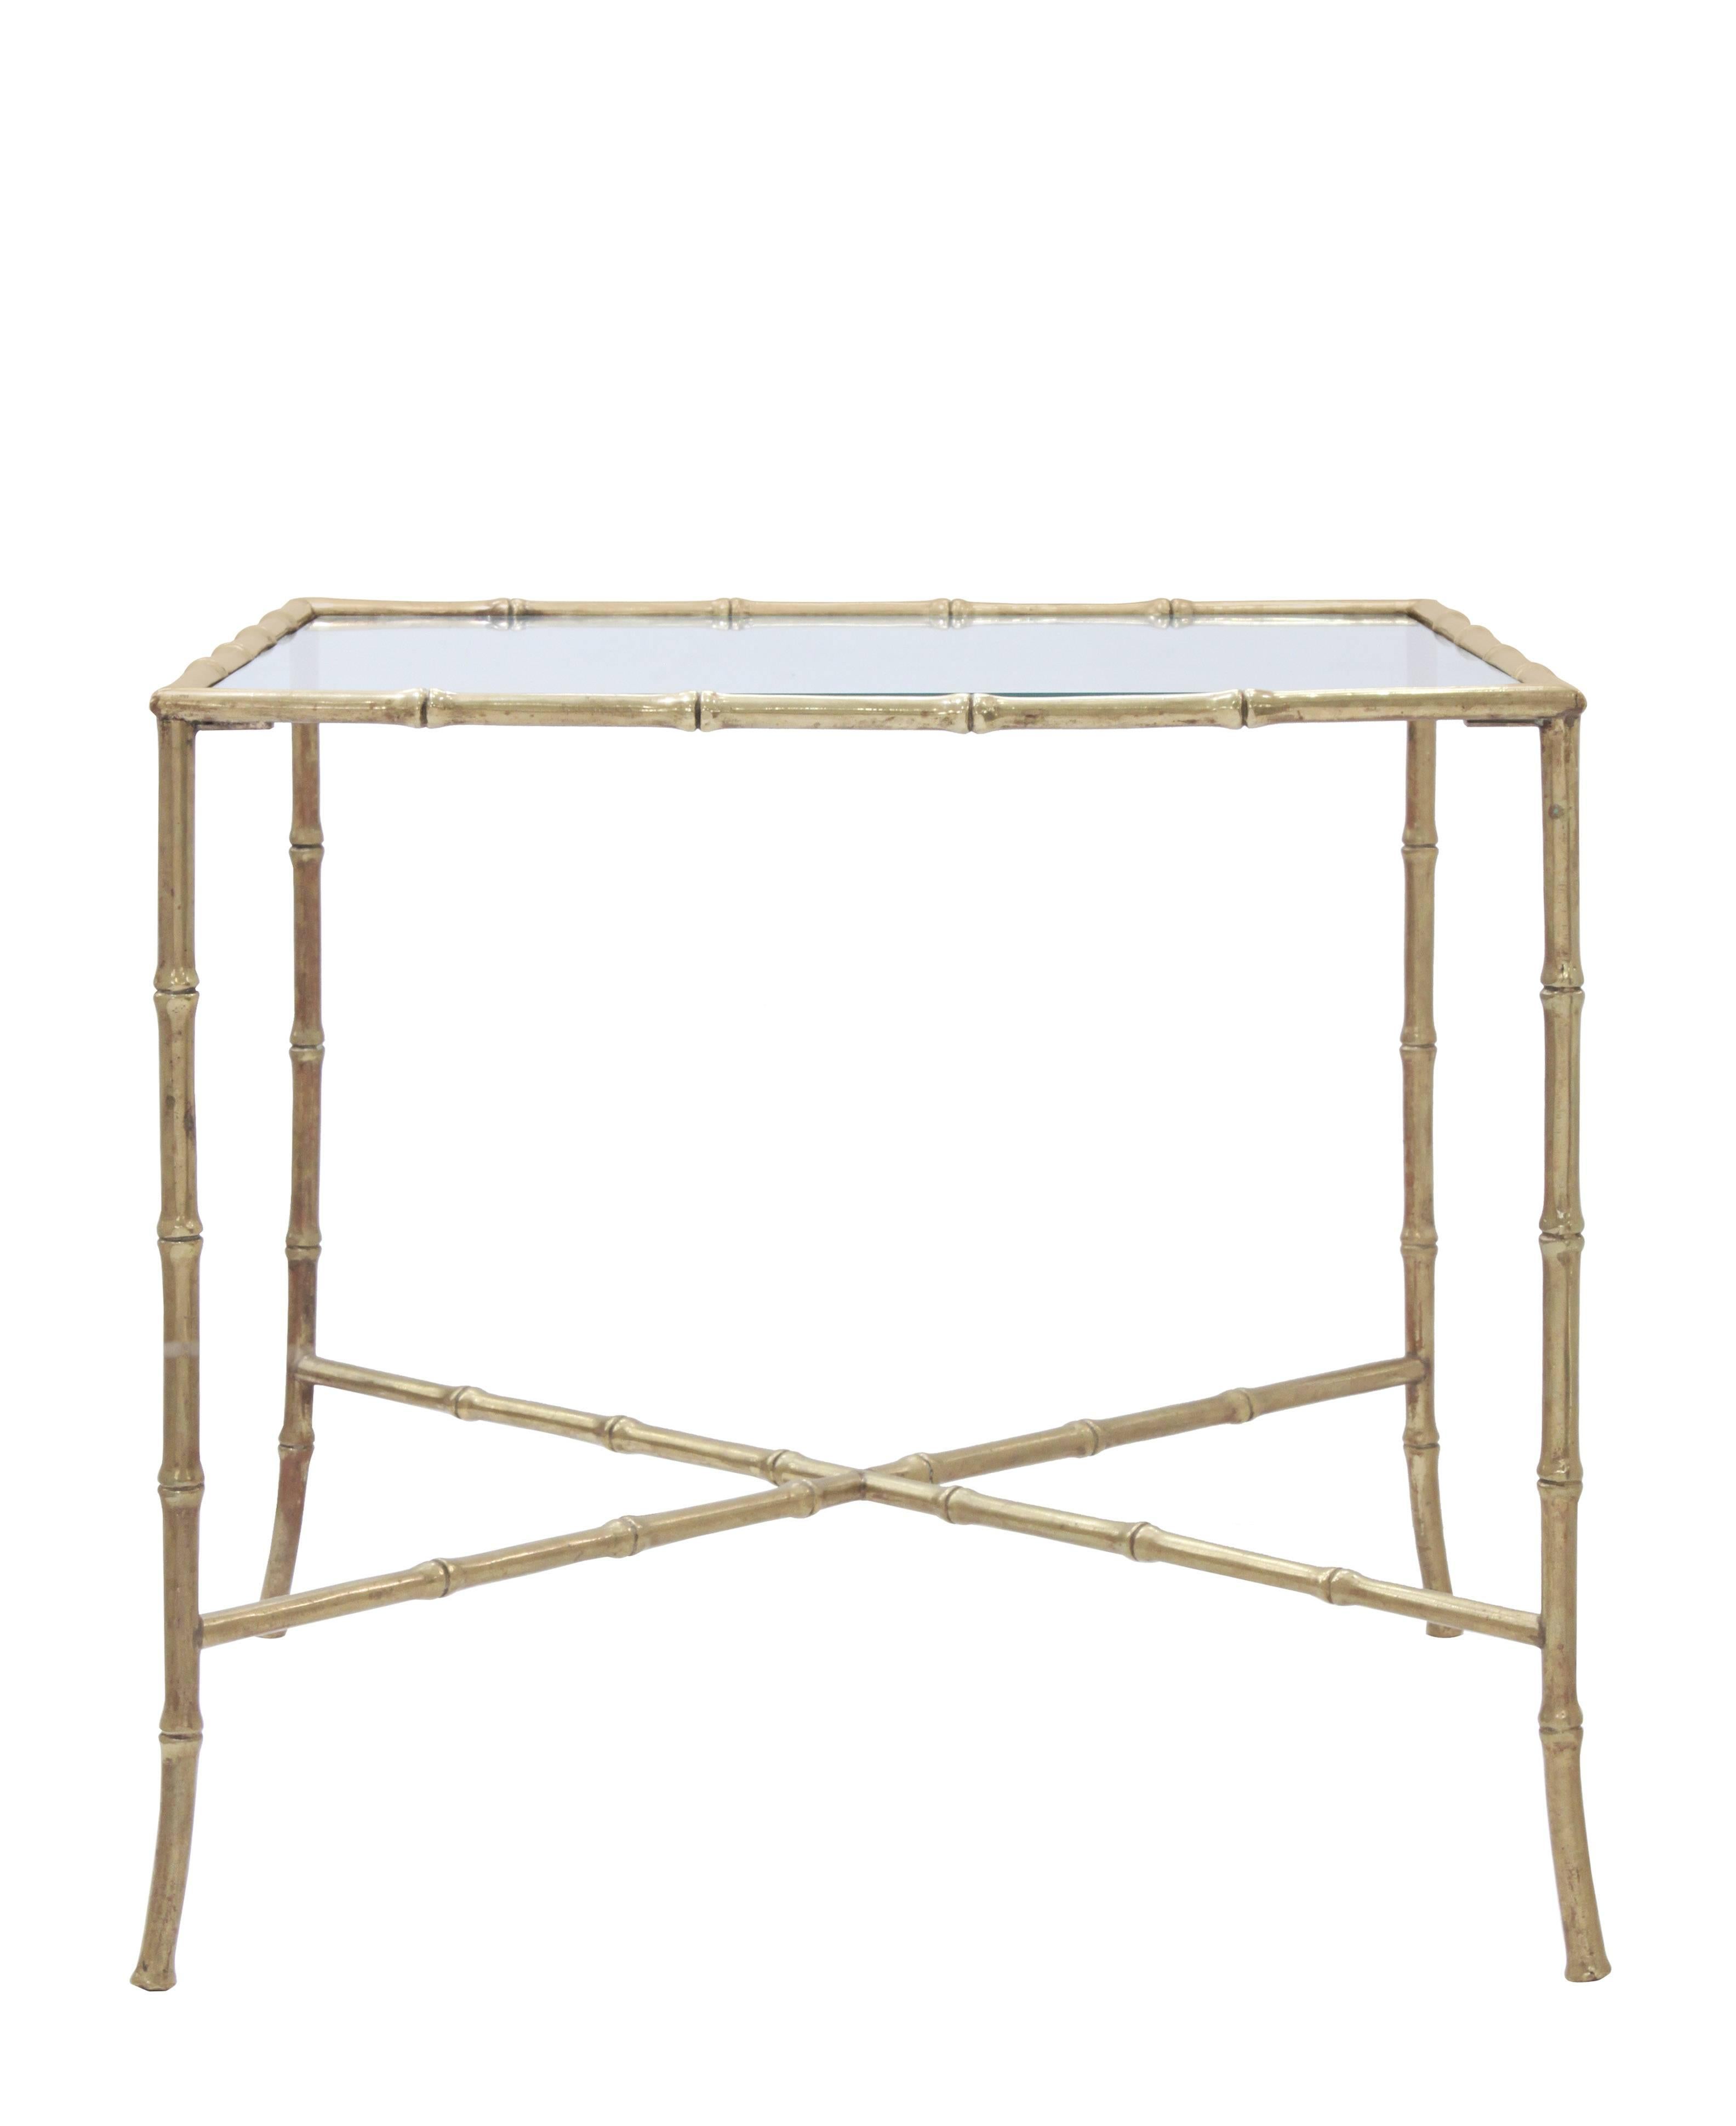 Elegant end table in brass with bamboo design and glass top, American 1950's